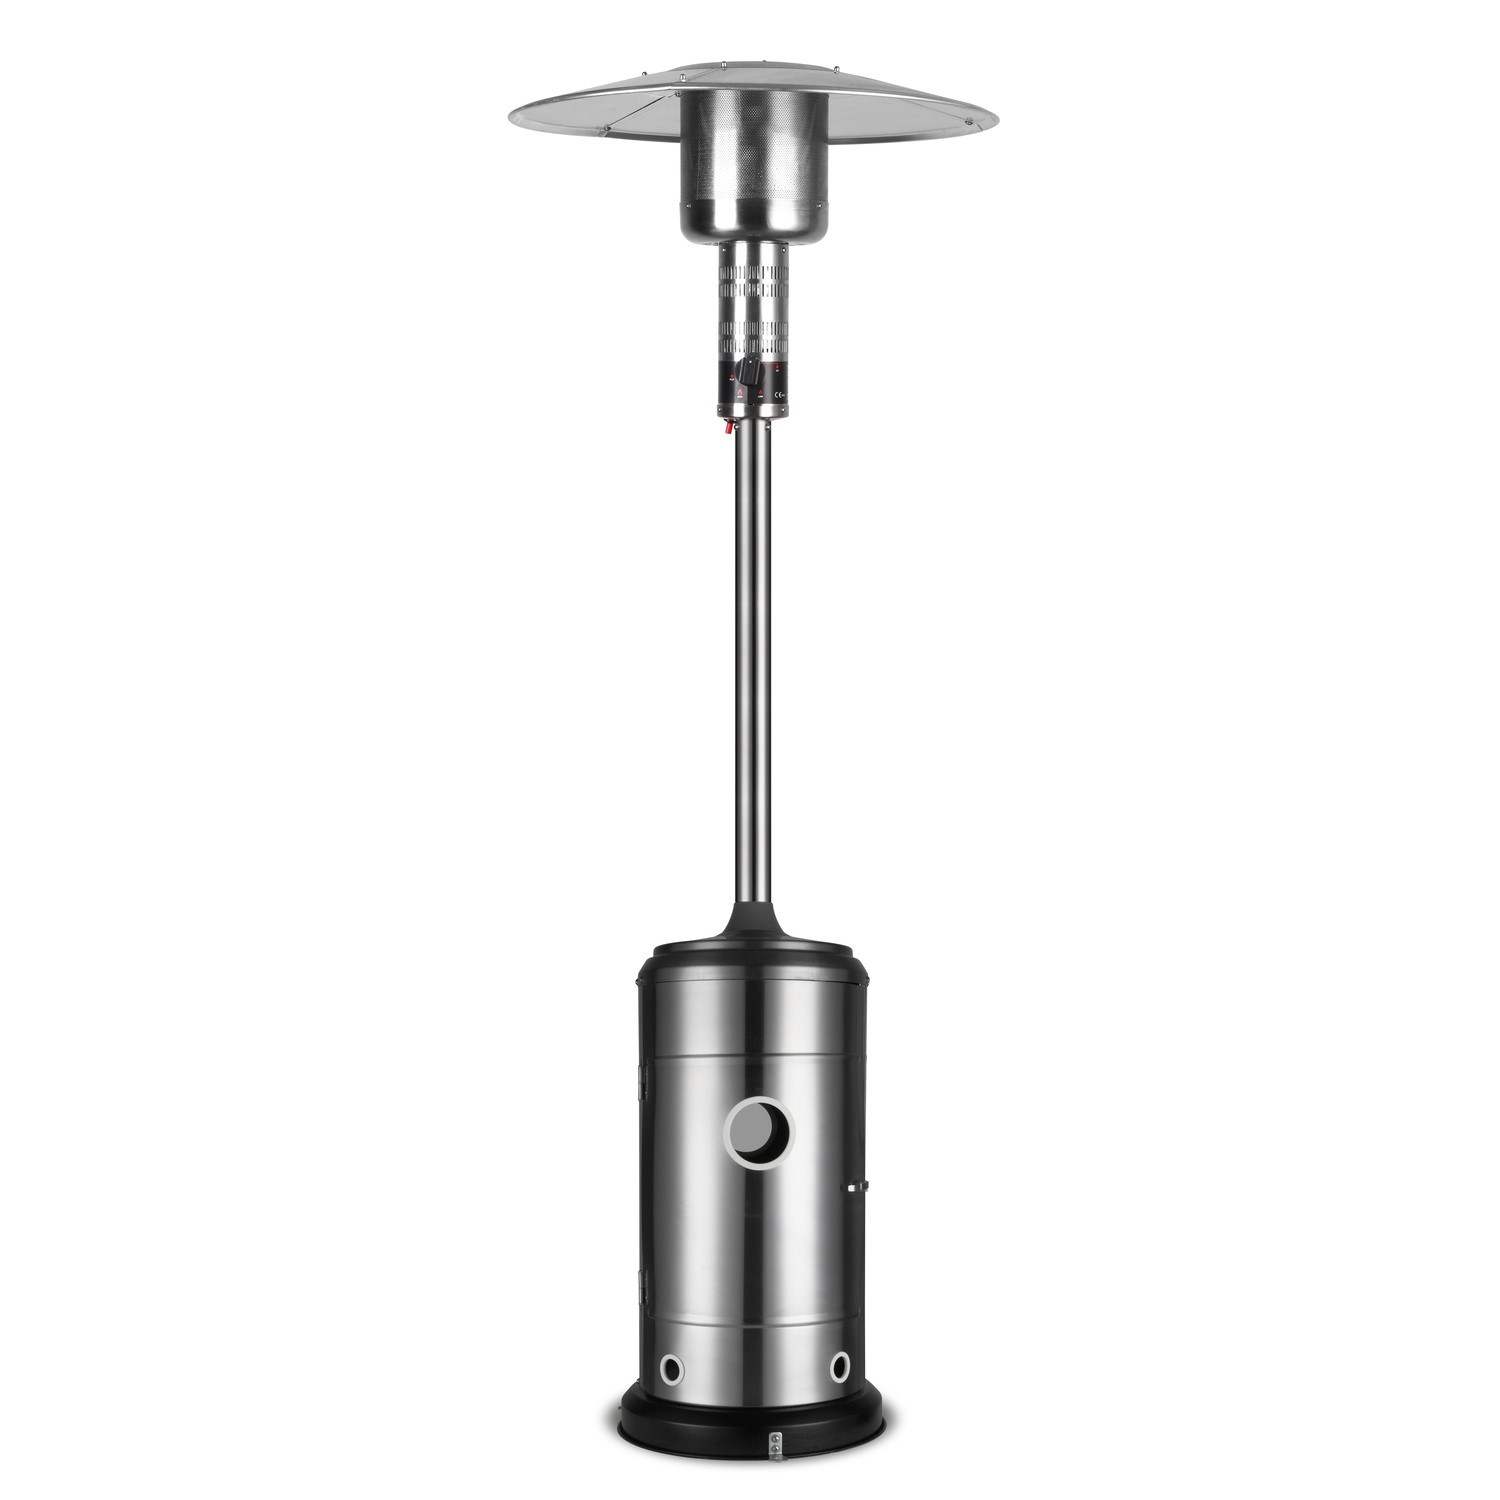 Mushroom Outdoor Gas Patio Heater - Silver with Free Cover